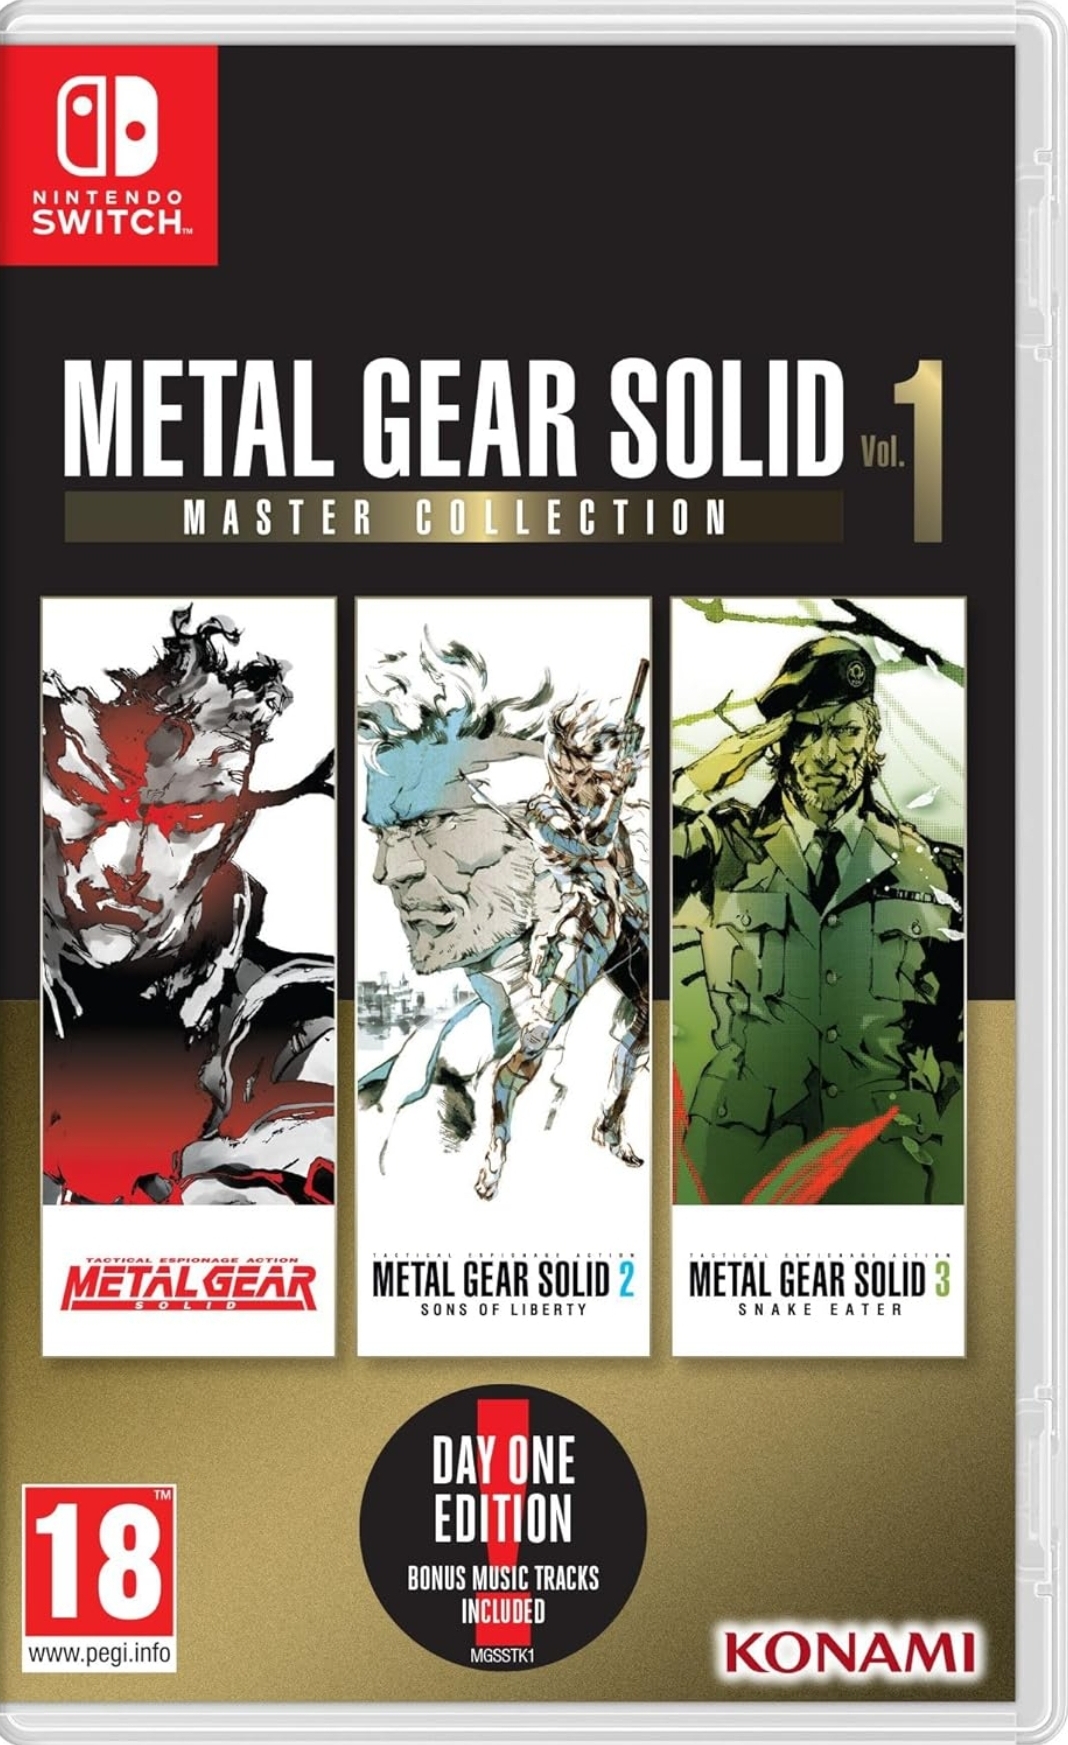 METAL GEAR SOLID: Master Collection Vol.1